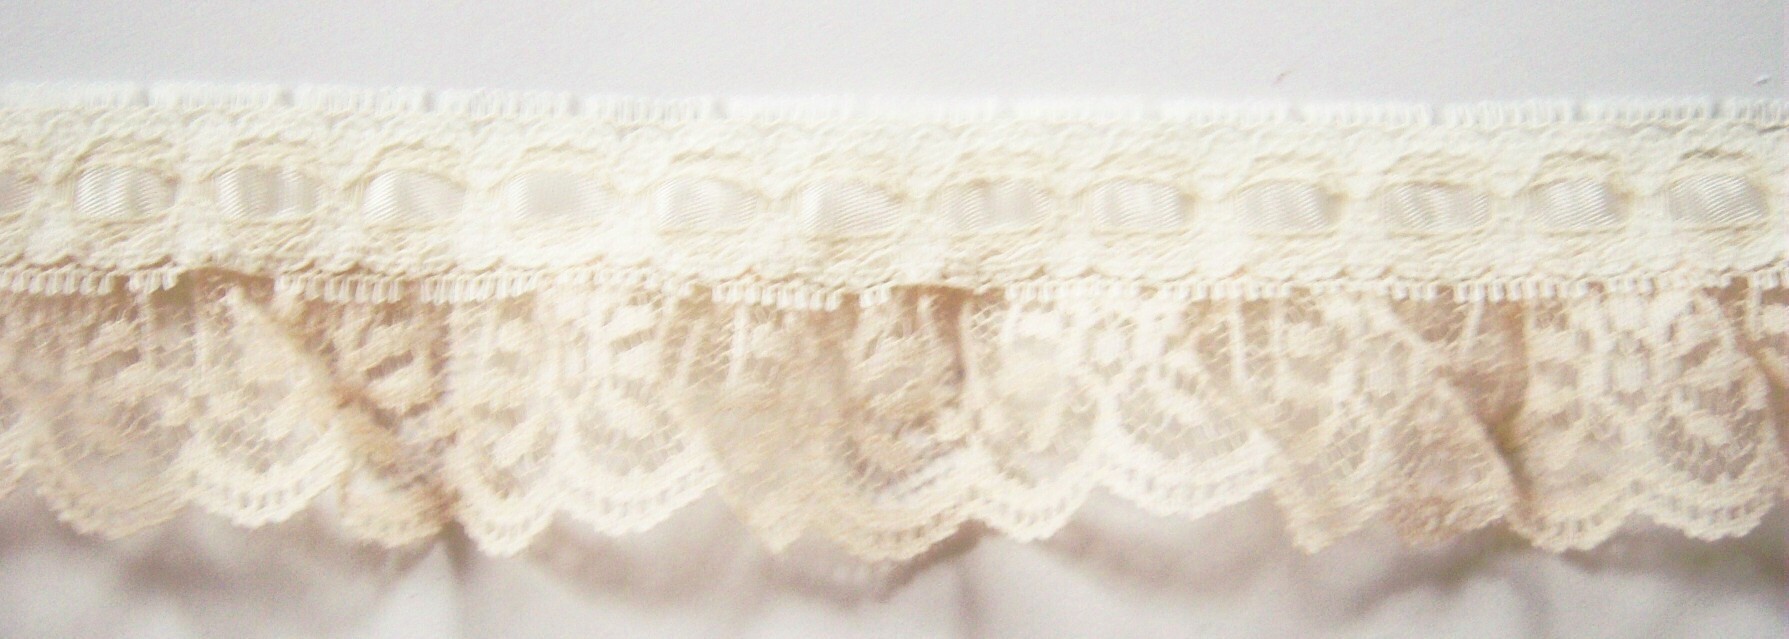 Ivory Satin/Bisque 1 5/8" Ruffled Lace